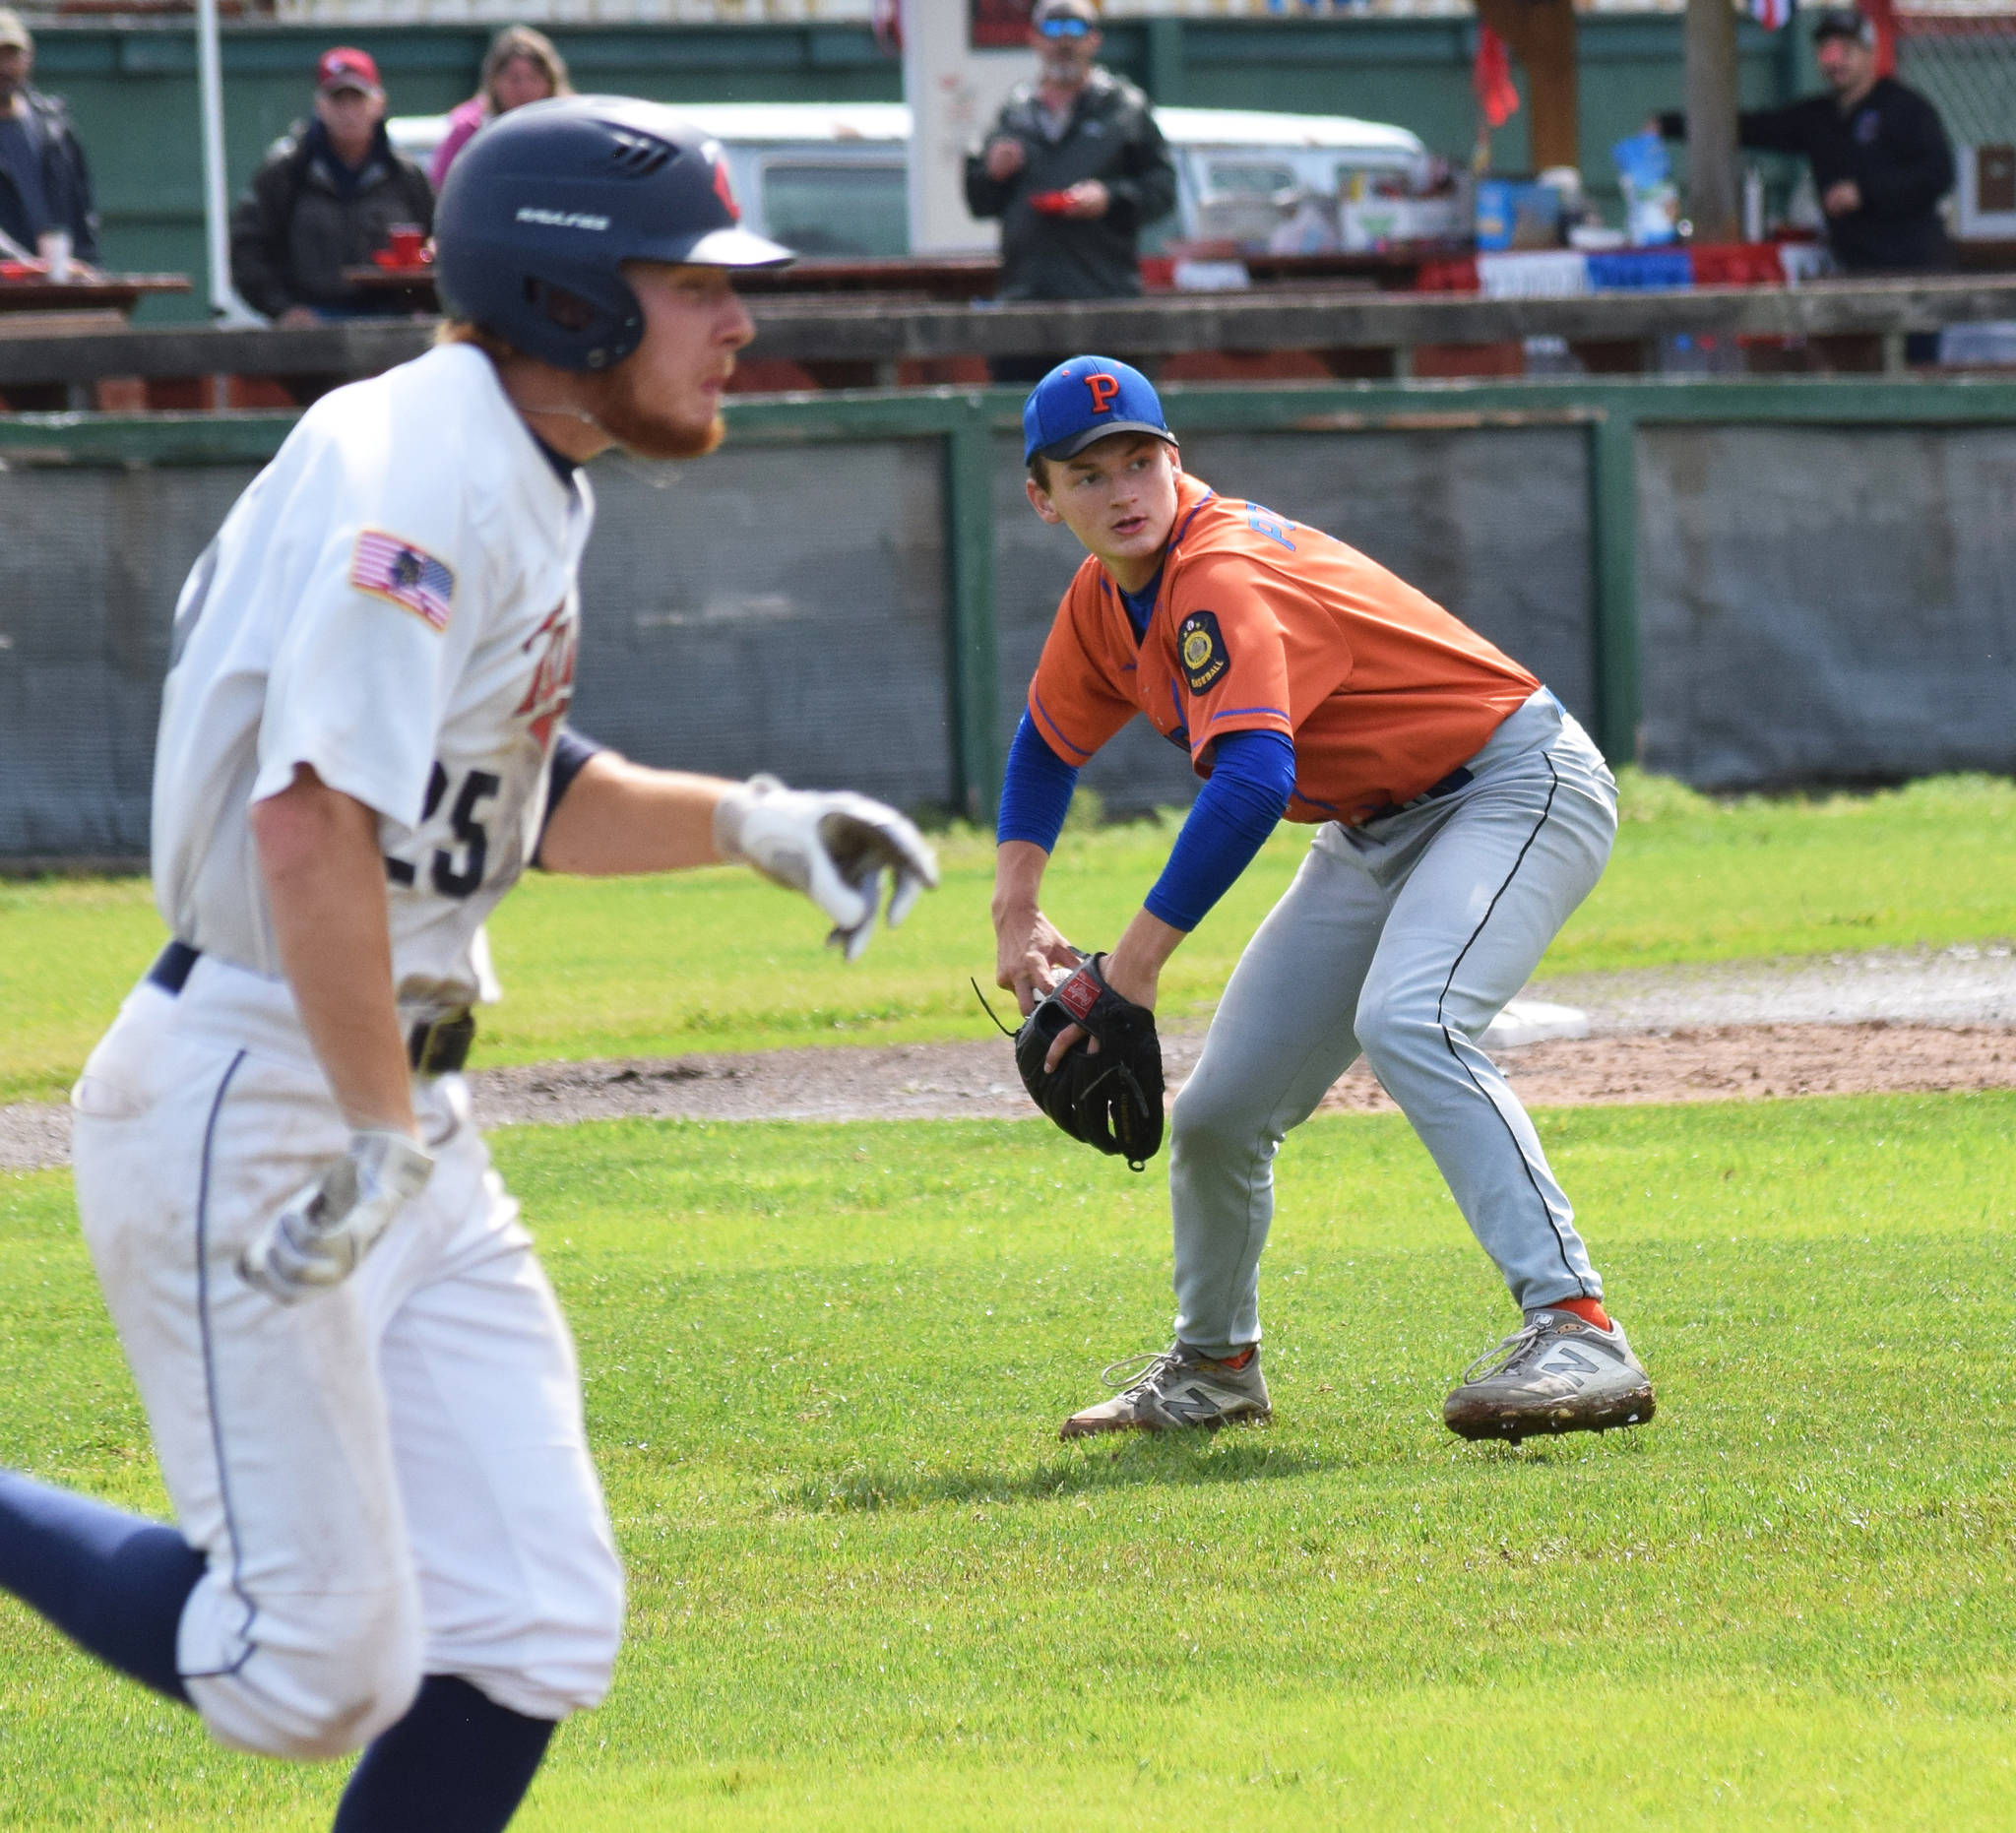 Palmer pitcher Ben Alley (right) fields a grounder by the Twins’ Jeremy Kupferschmid Tuesday, July 16, 2019, at Coral Seymour Memorial Park in Kenai, Alaska. (Photo by Joey Klecka/Peninsula Clarion)